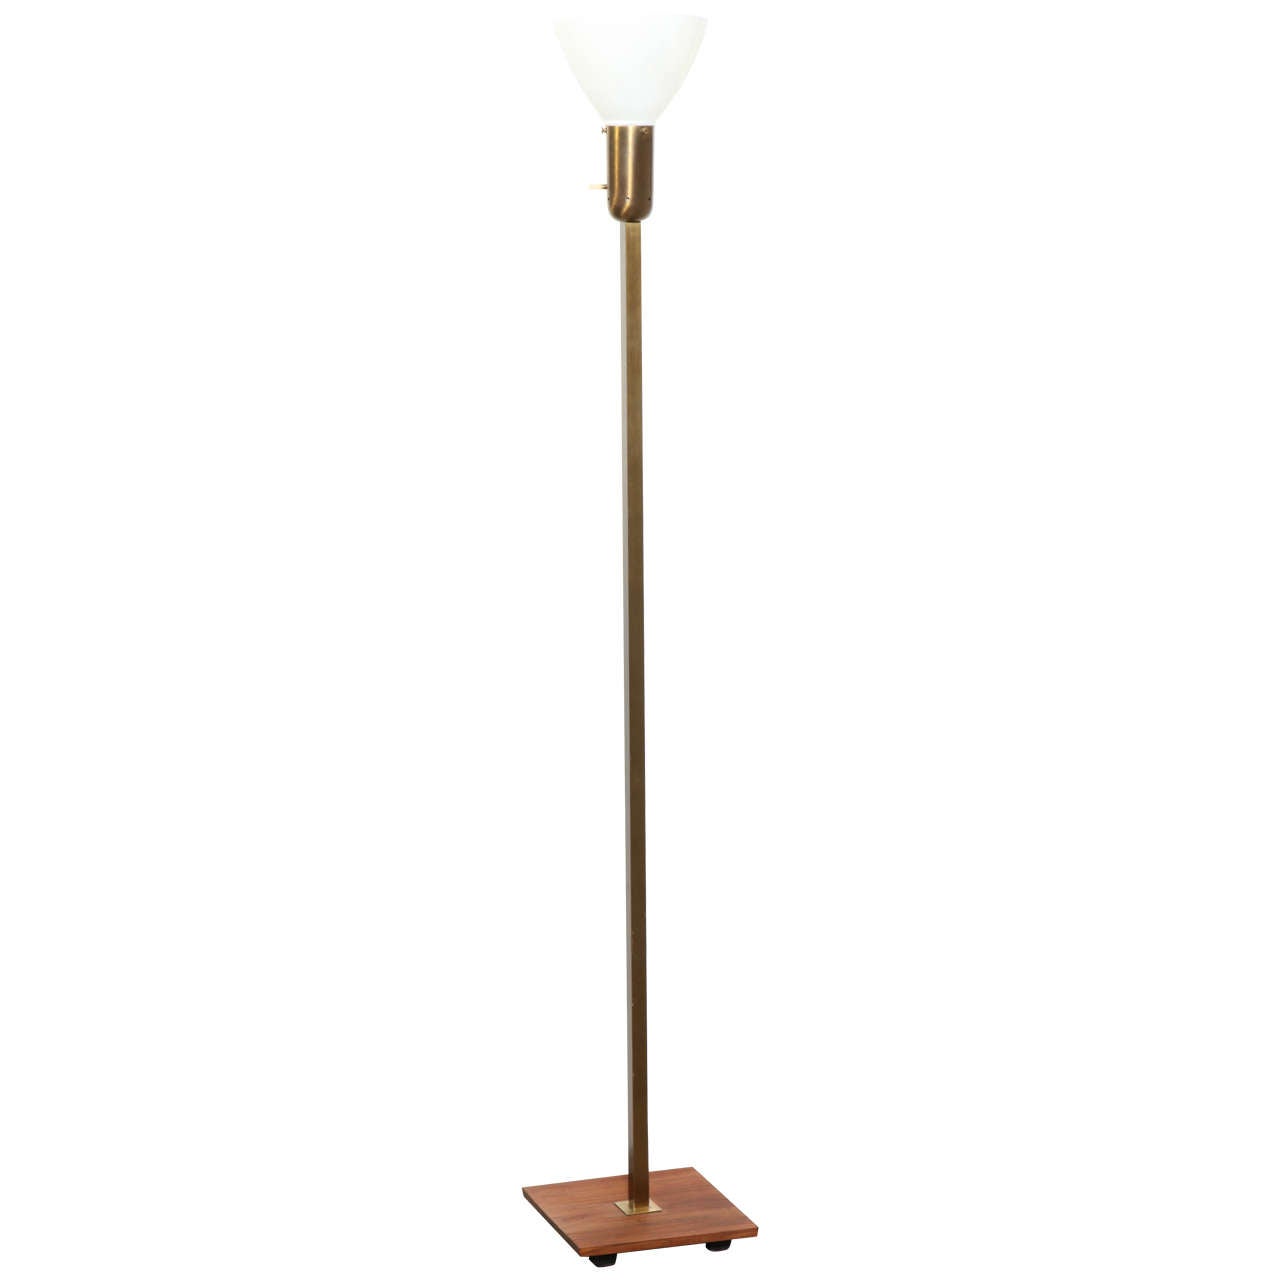 American Mid Century Modern Nessen Studios Brass and Walnut Floor Lamp with White Milk Glass Liner Shade. Featuring a square Brass tubular column, classic Nessen Brass socket, with period opaque Glass Liner Shade (8W x 5.5H), atop a square Walnut